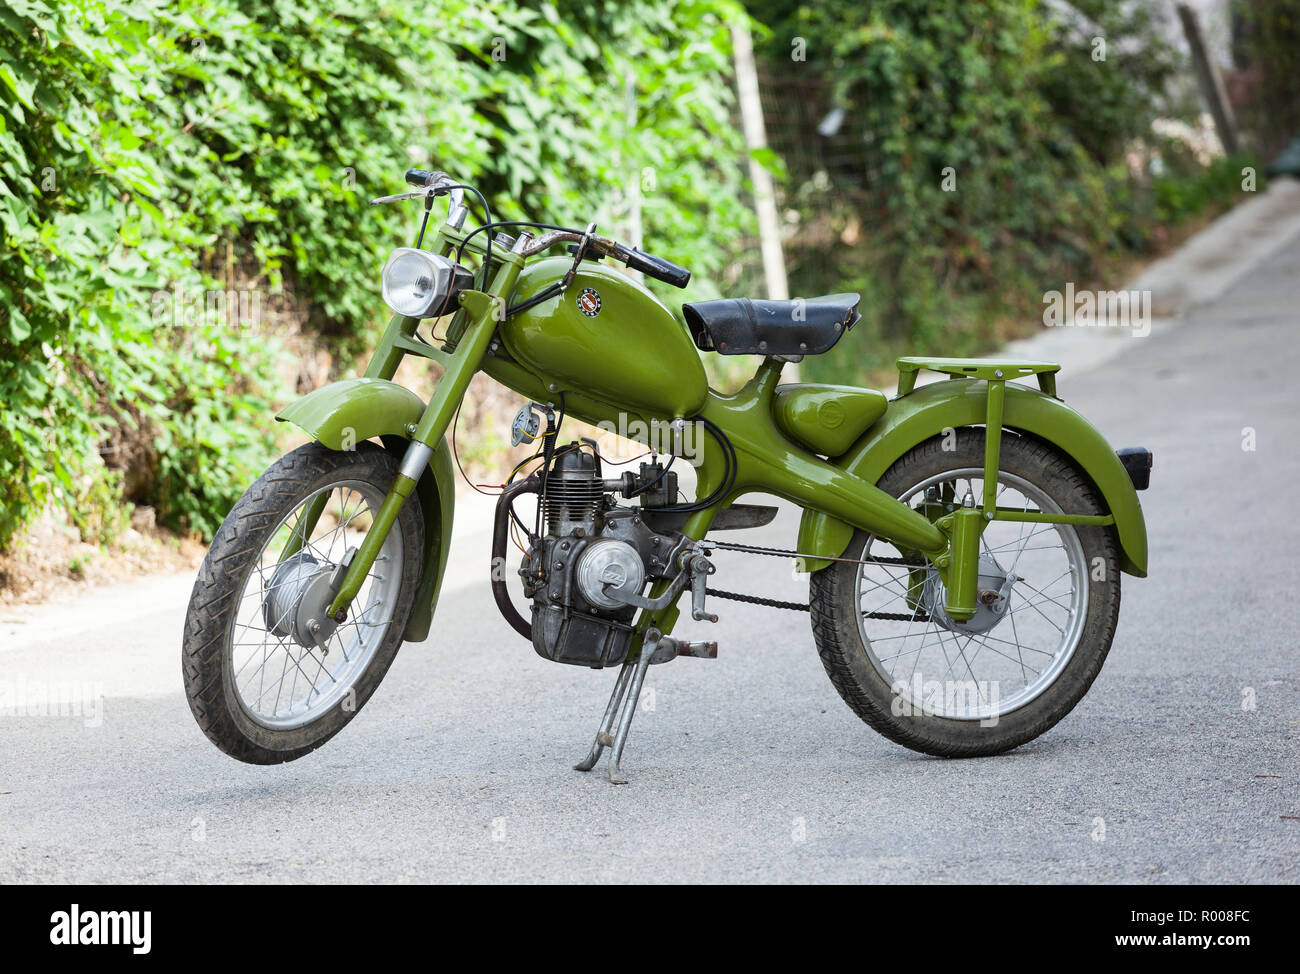 Teano, Italy - July 29, 2012: vintage Italian moped Motom 48, low fuel consumption four-stroke engine. Motom was a Milanese motorcycle company active  Stock Photo